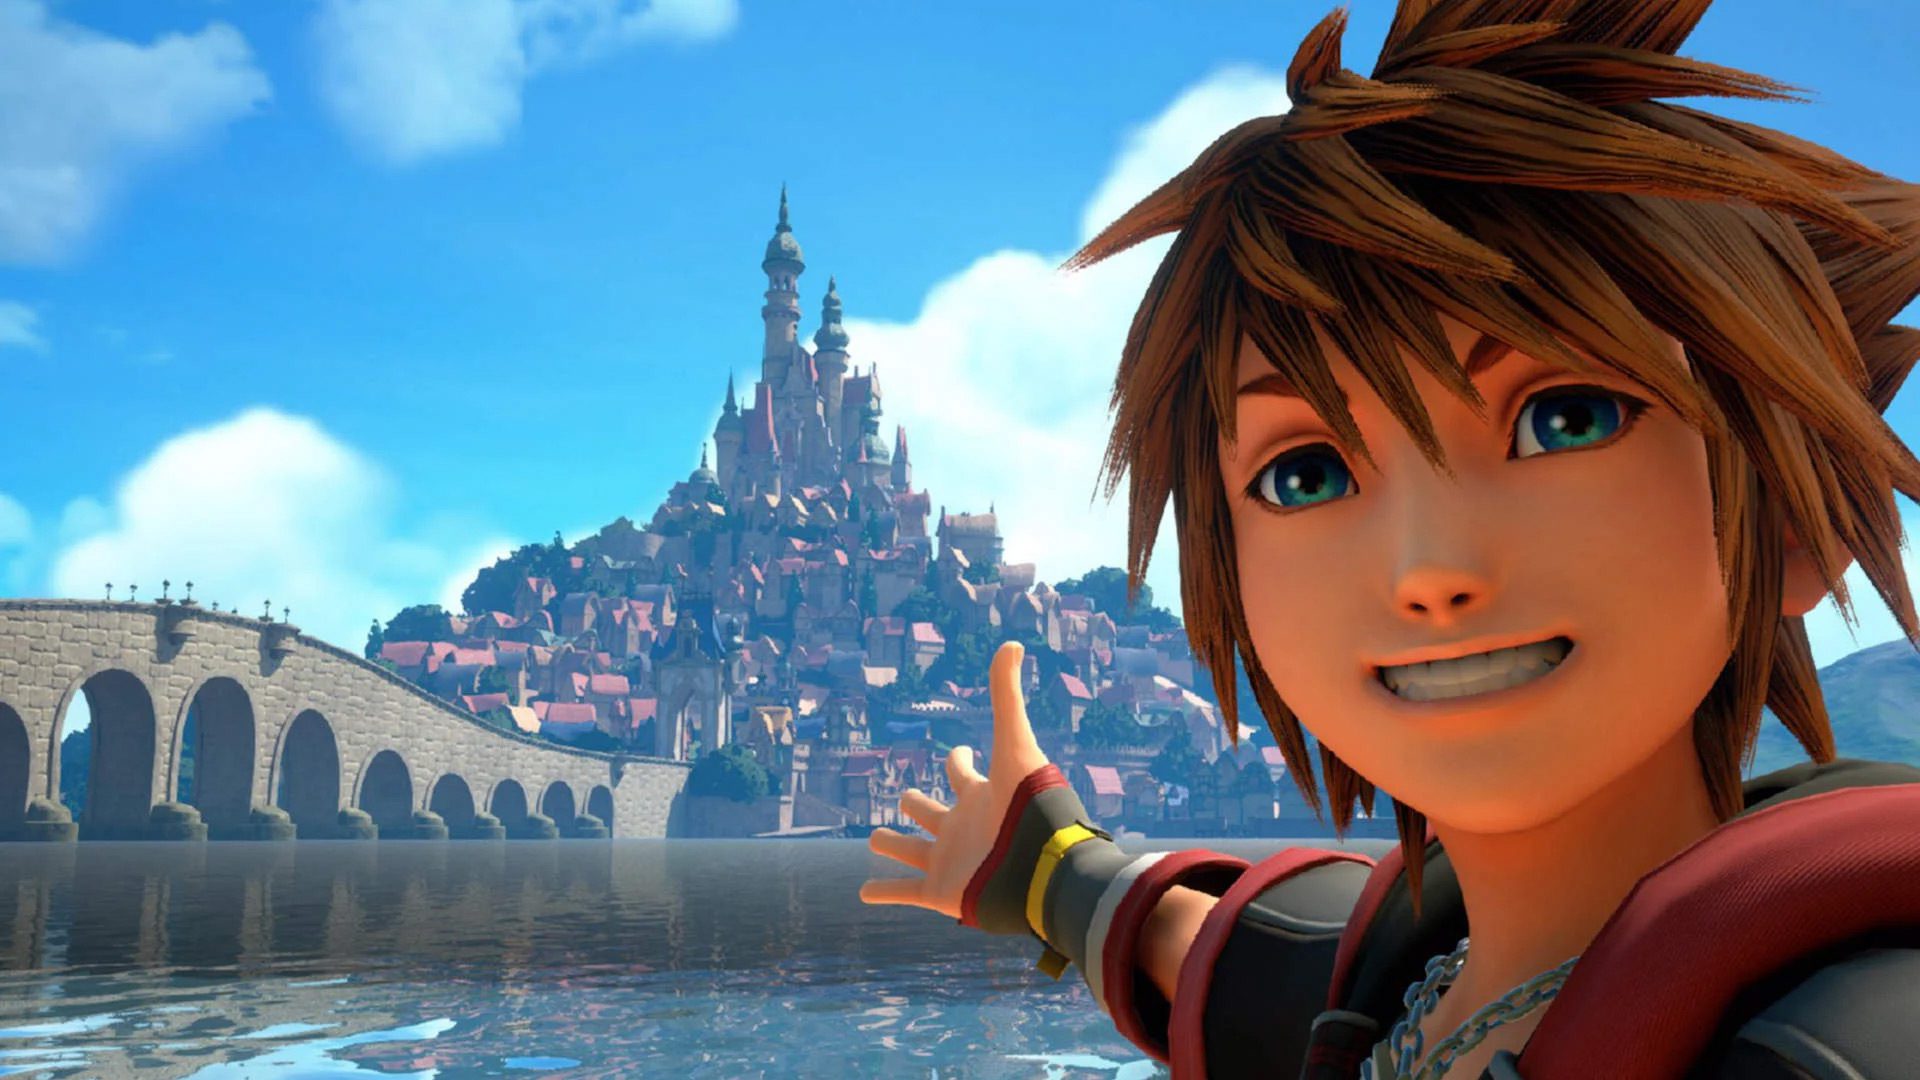 Kingdom Hearts is a poster child for video game lore